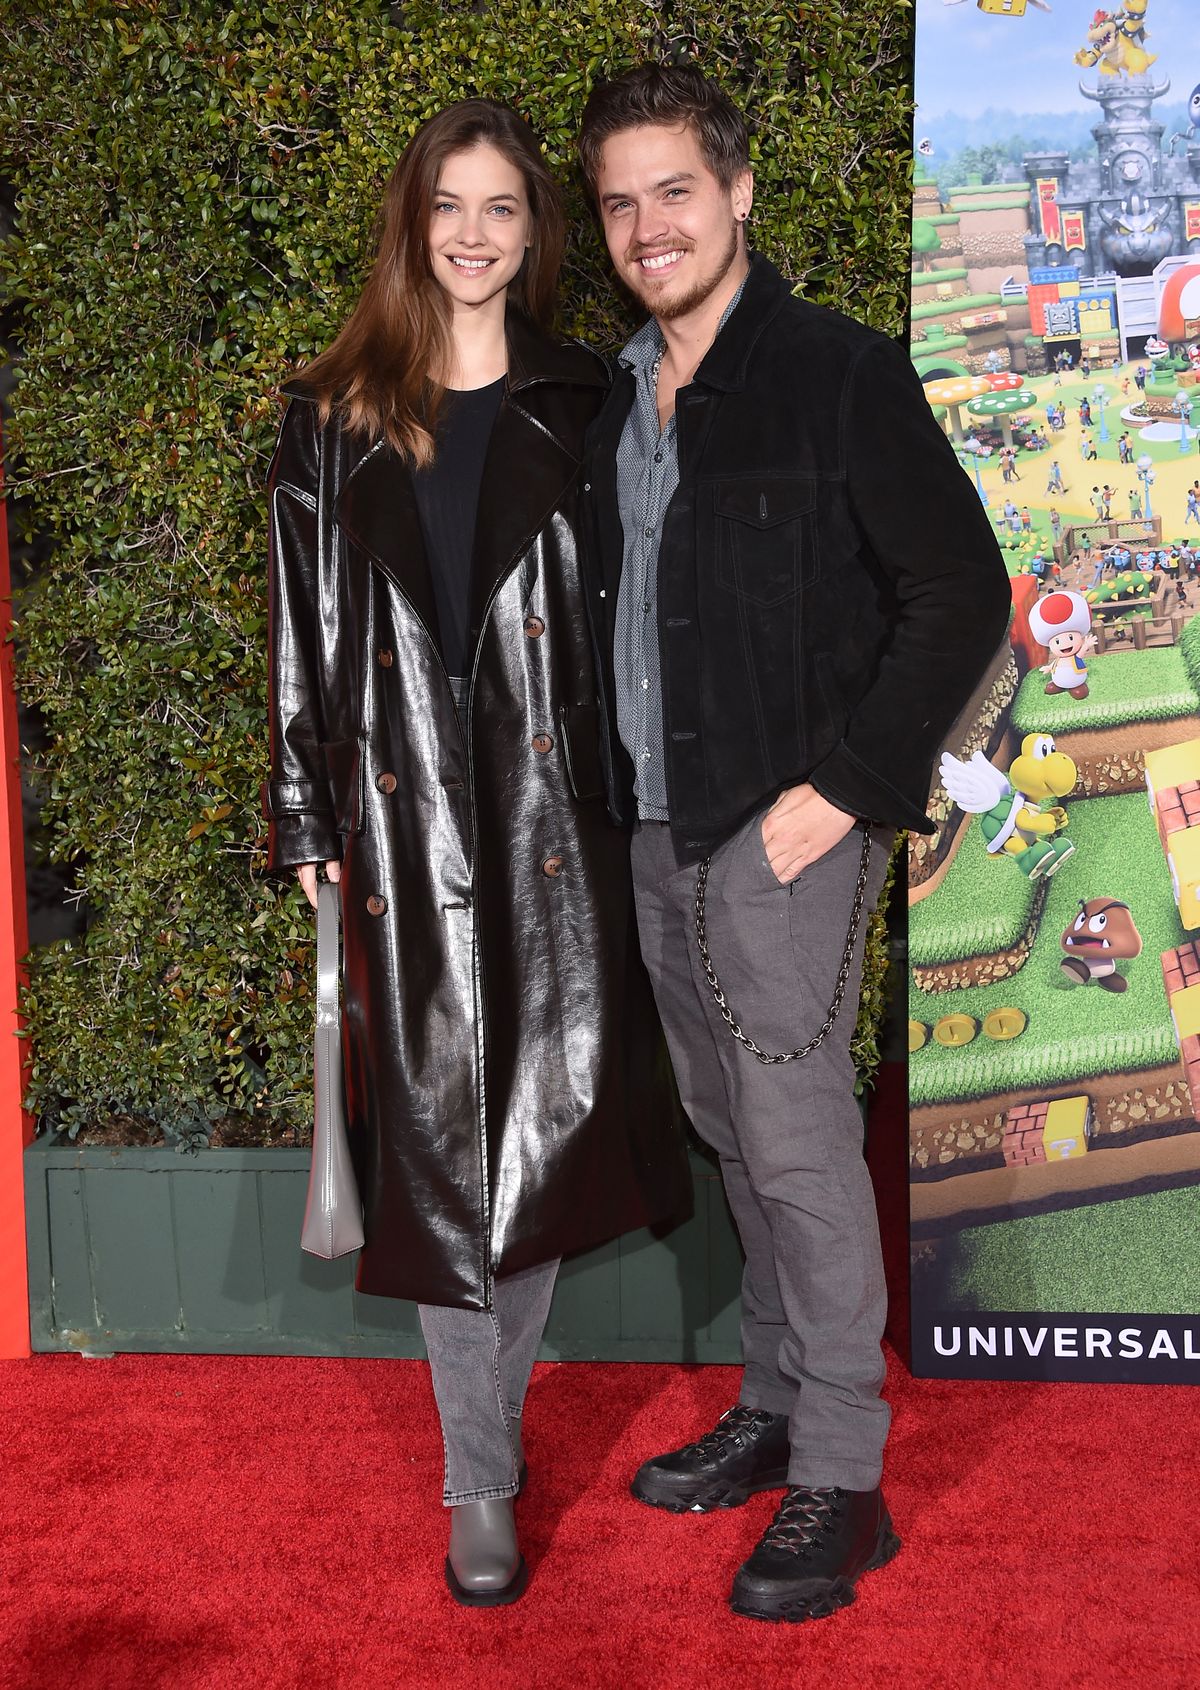 Hungarian model Barbara Palvin (L) and Italian-US actor Dylan Sprouse arrive for Universal Studios' Super Nintendo World celebration event in Universal City, California, on February 15, 2023. The park offically opens to the public on February 17, 2023, and marks Super Nintendo World's arrival in the United States. (Photo by LISA O'CONNOR / AFP)